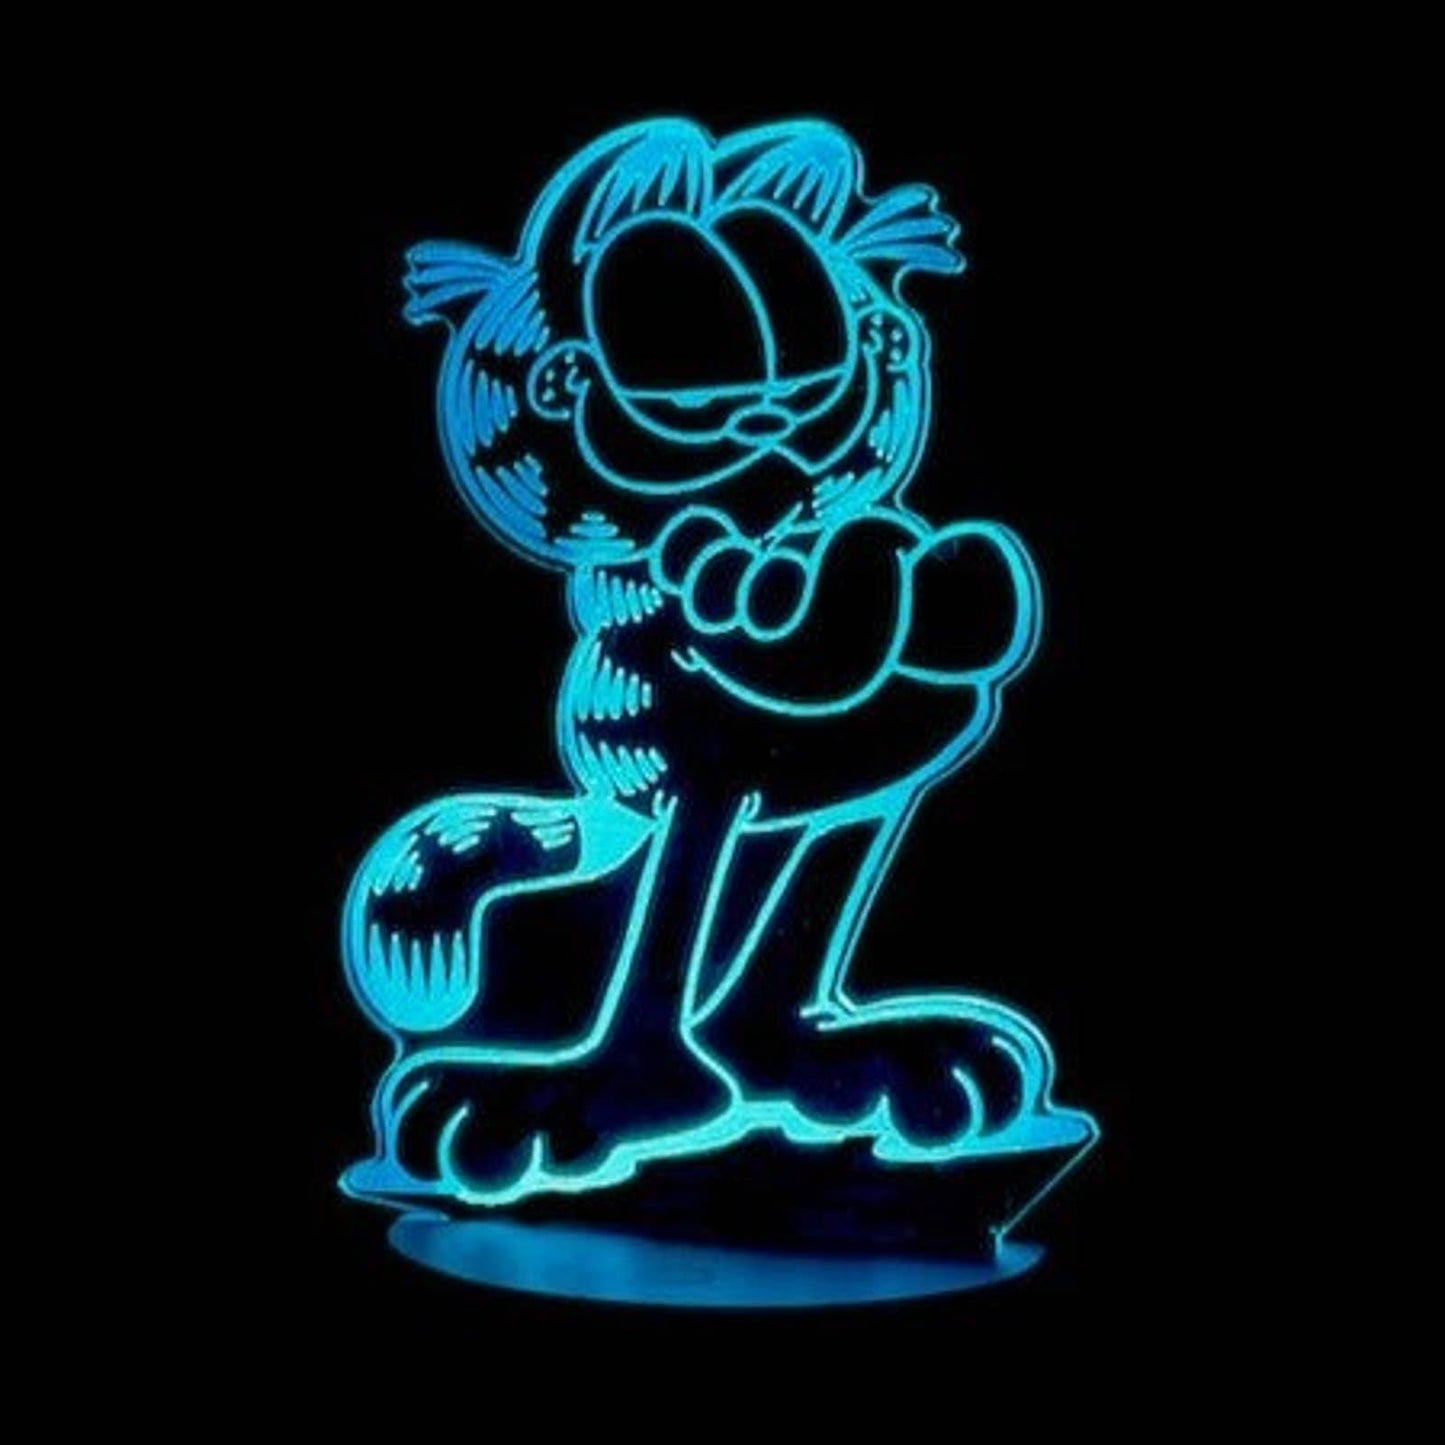 Garfield 3D LED Night-Light 7 Color Changing Lamp w/ Touch Switch